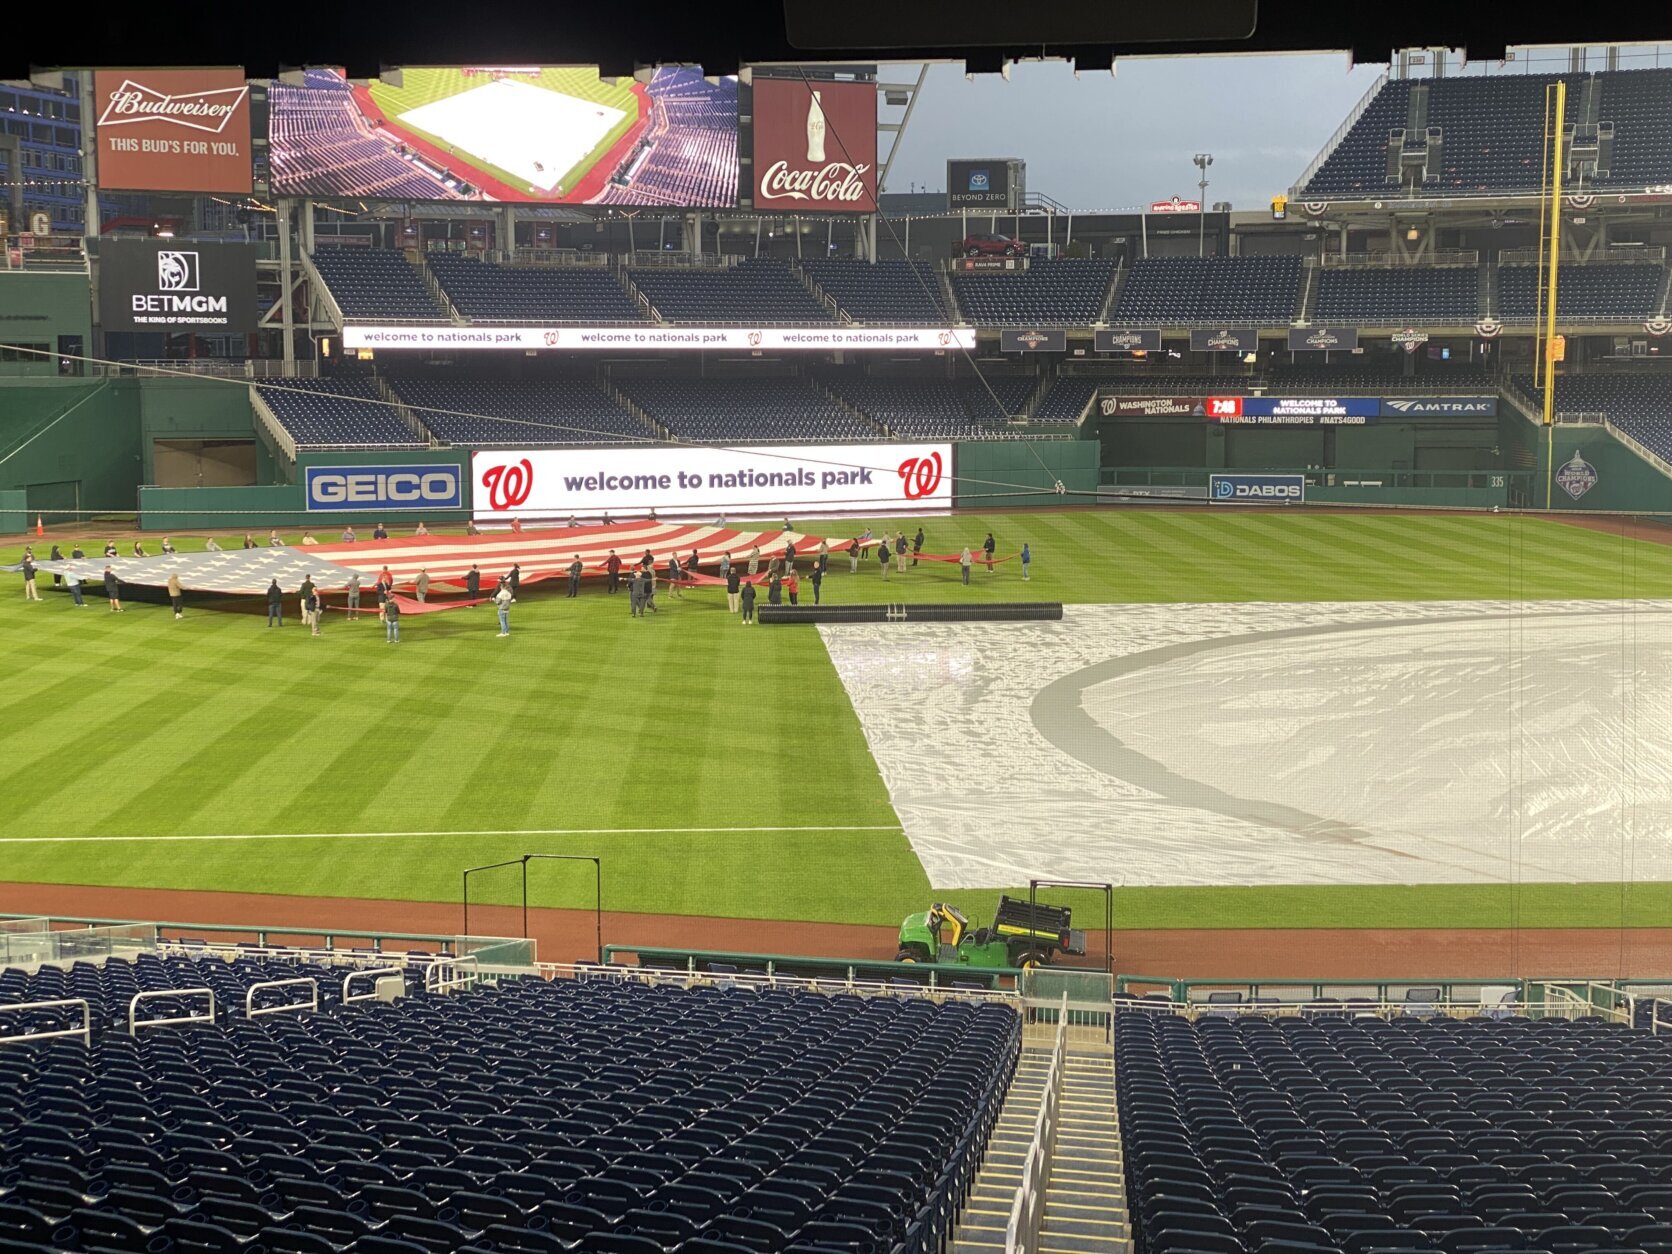 Flag being unfurled at Nats Park